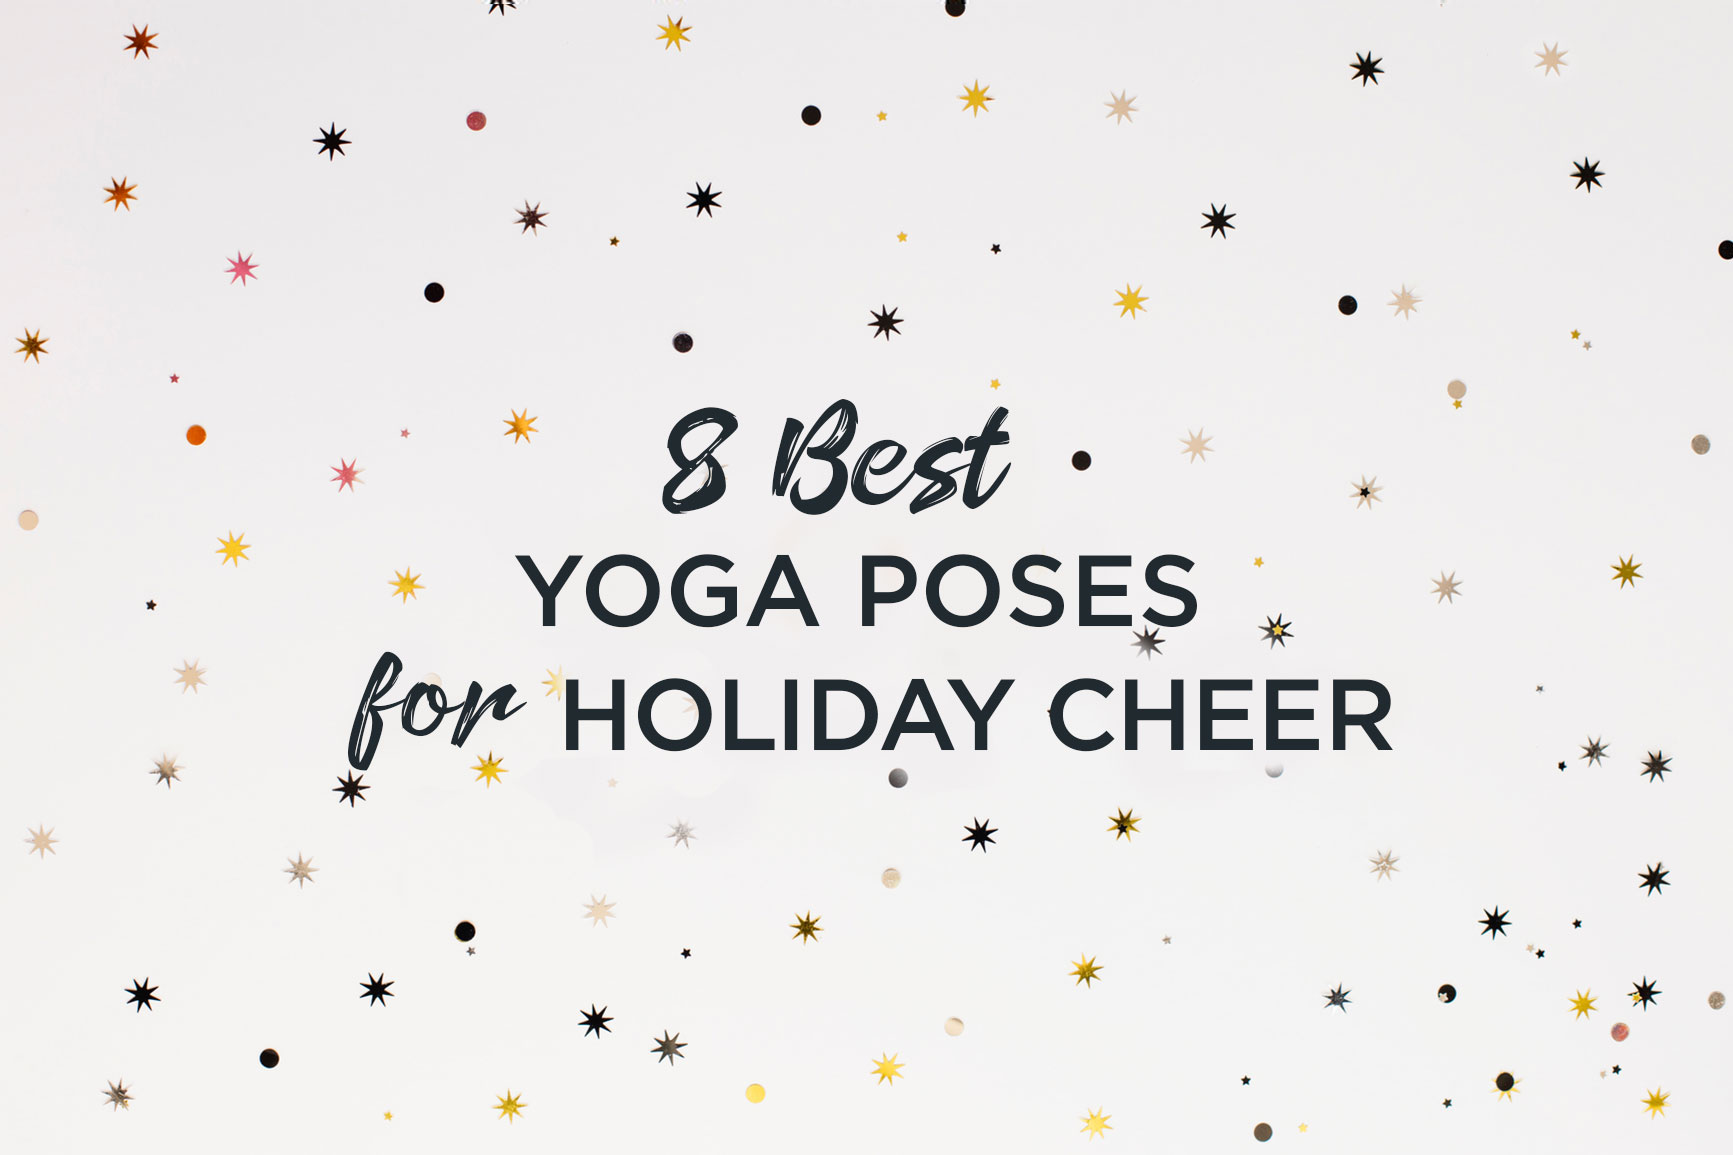 8 Best Yoga Poses for Holiday Cheer